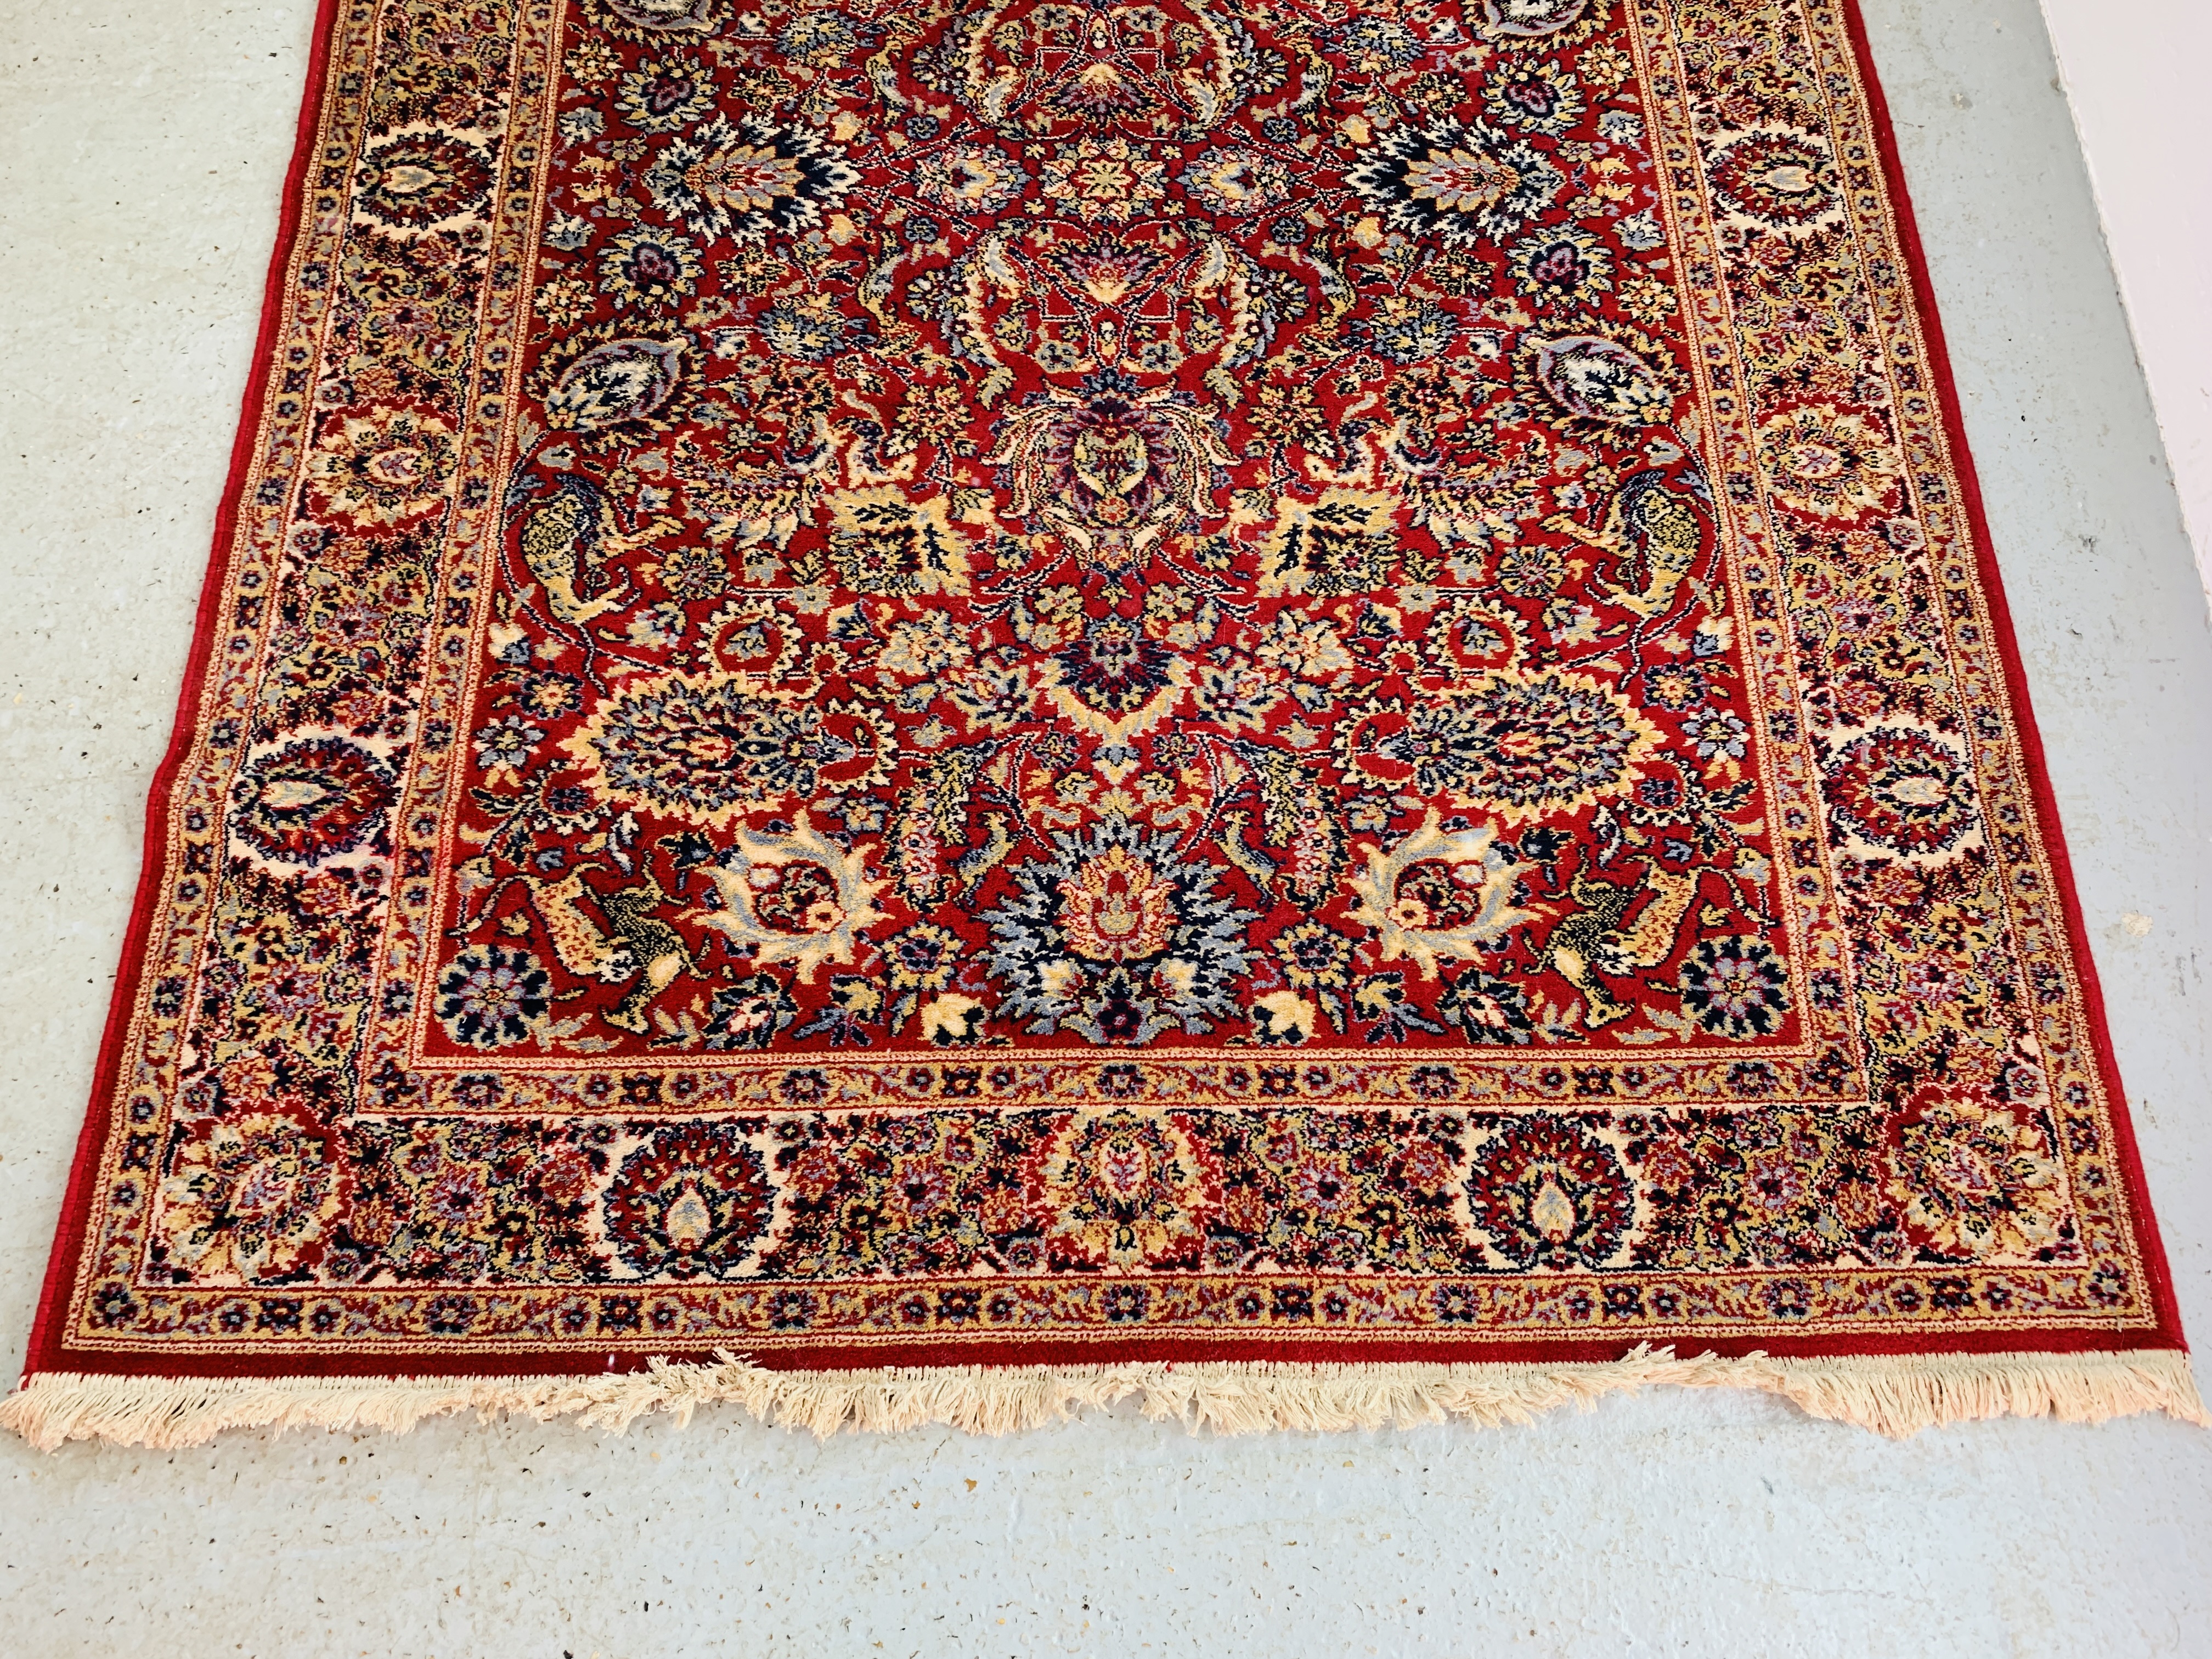 AN ORIENTAL DECORATED RUG 184CM X 92CM AND MODERN MACHINE MADE KEESHAN RED PATTERNED RUG 197 X - Image 5 of 11